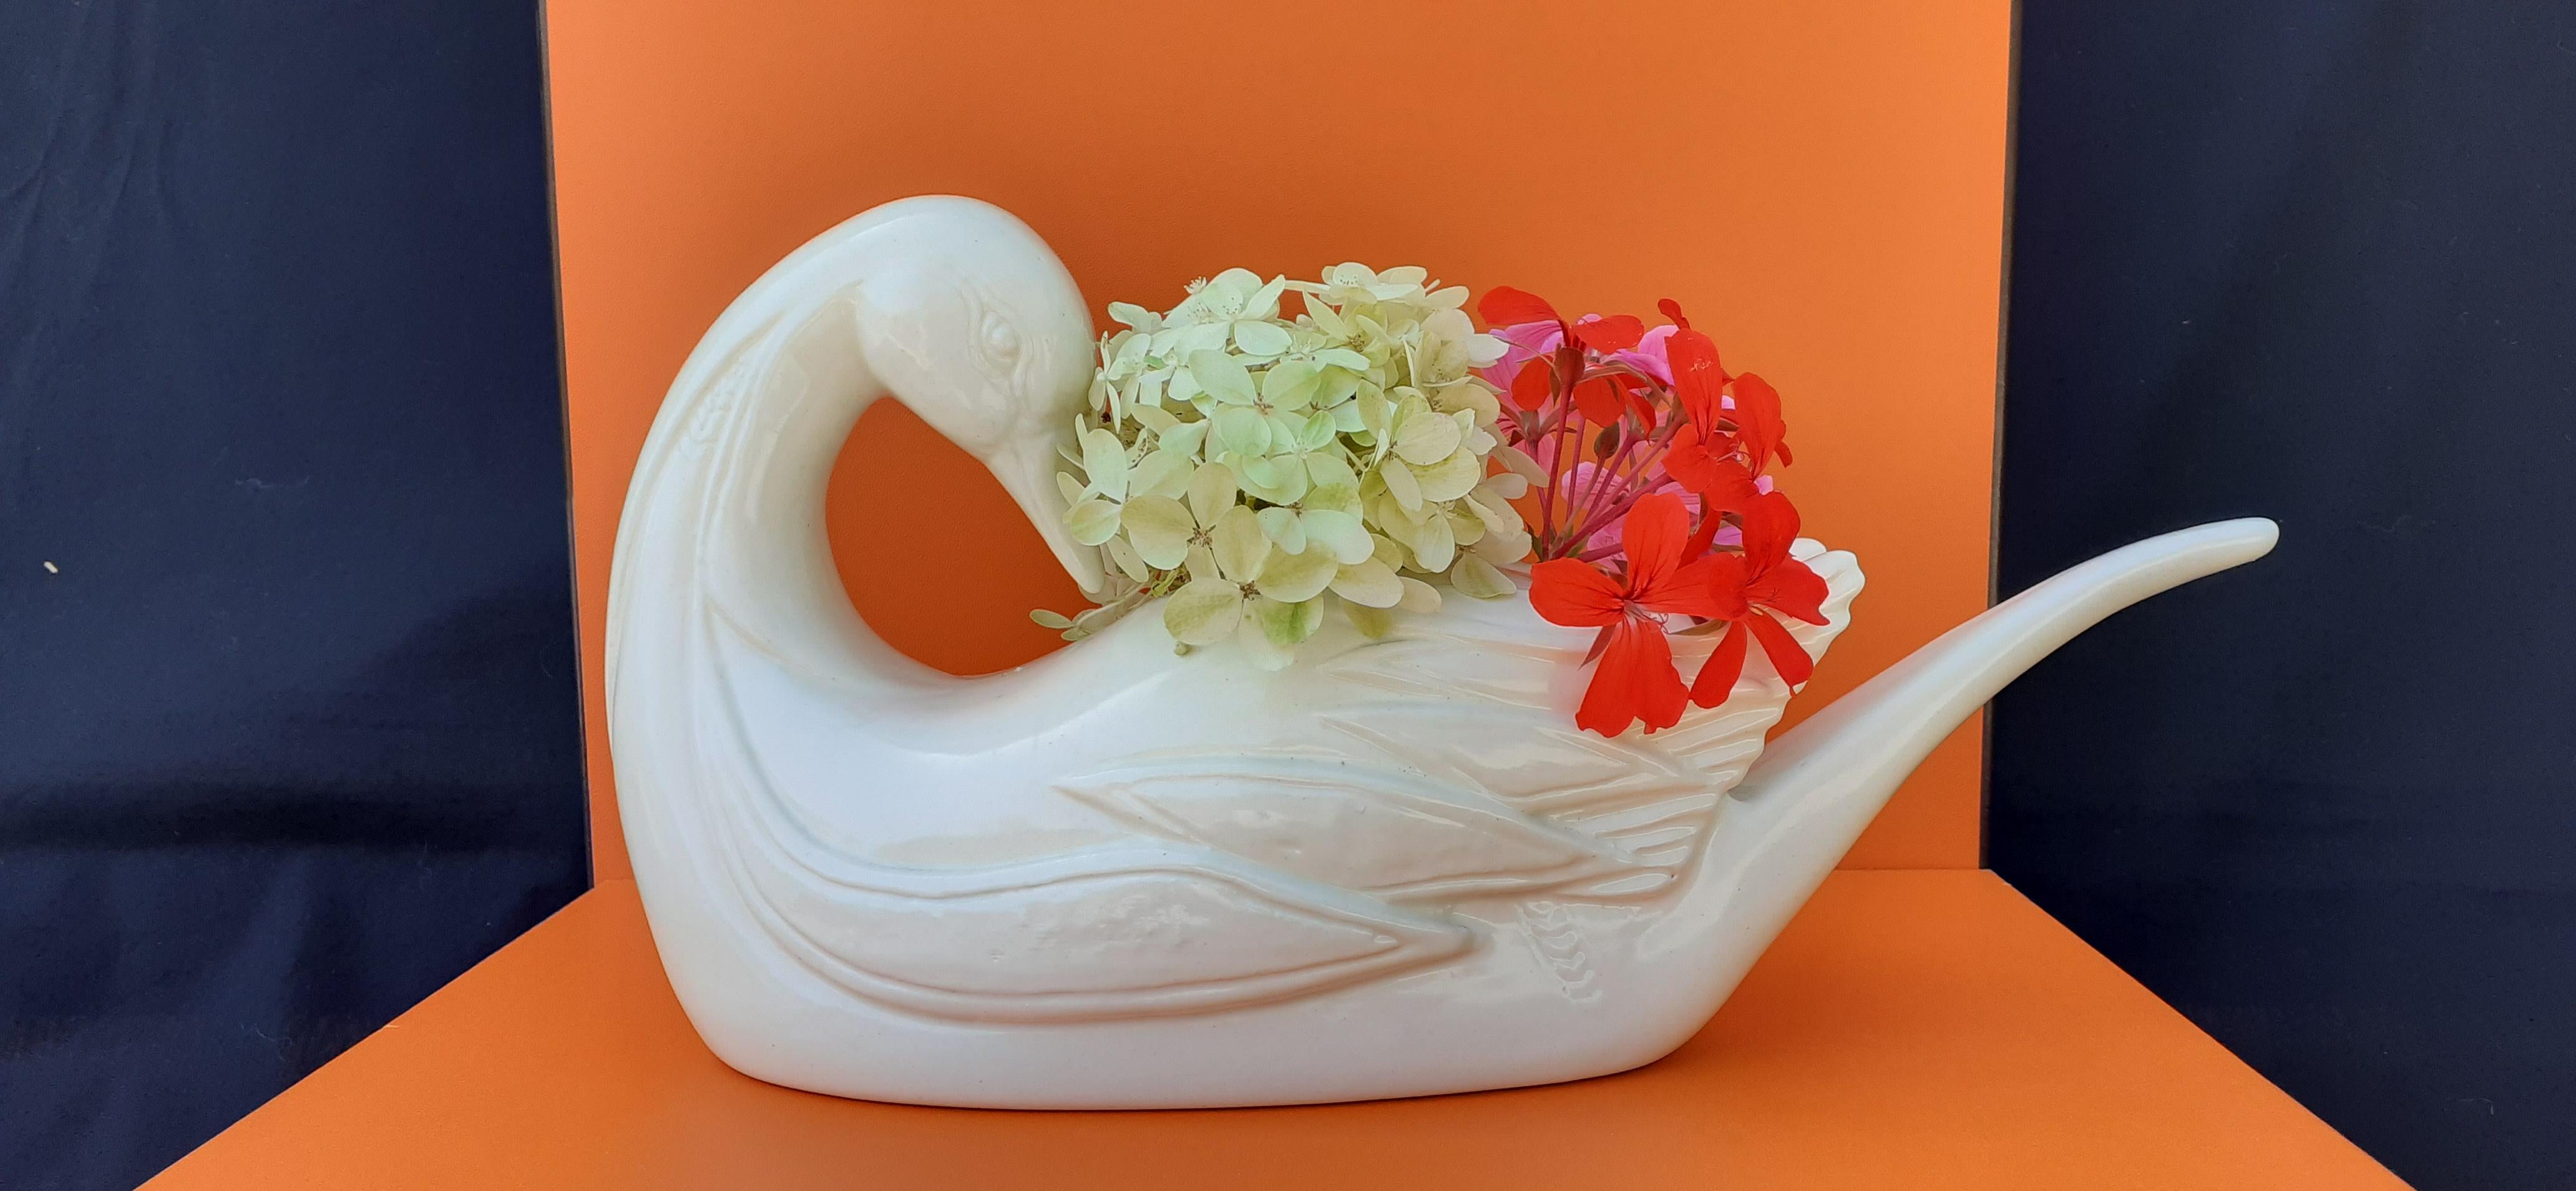 Extremely Rare Authentic Hermès Centerpiece Vase

Duck shaped

From the Hermès design 